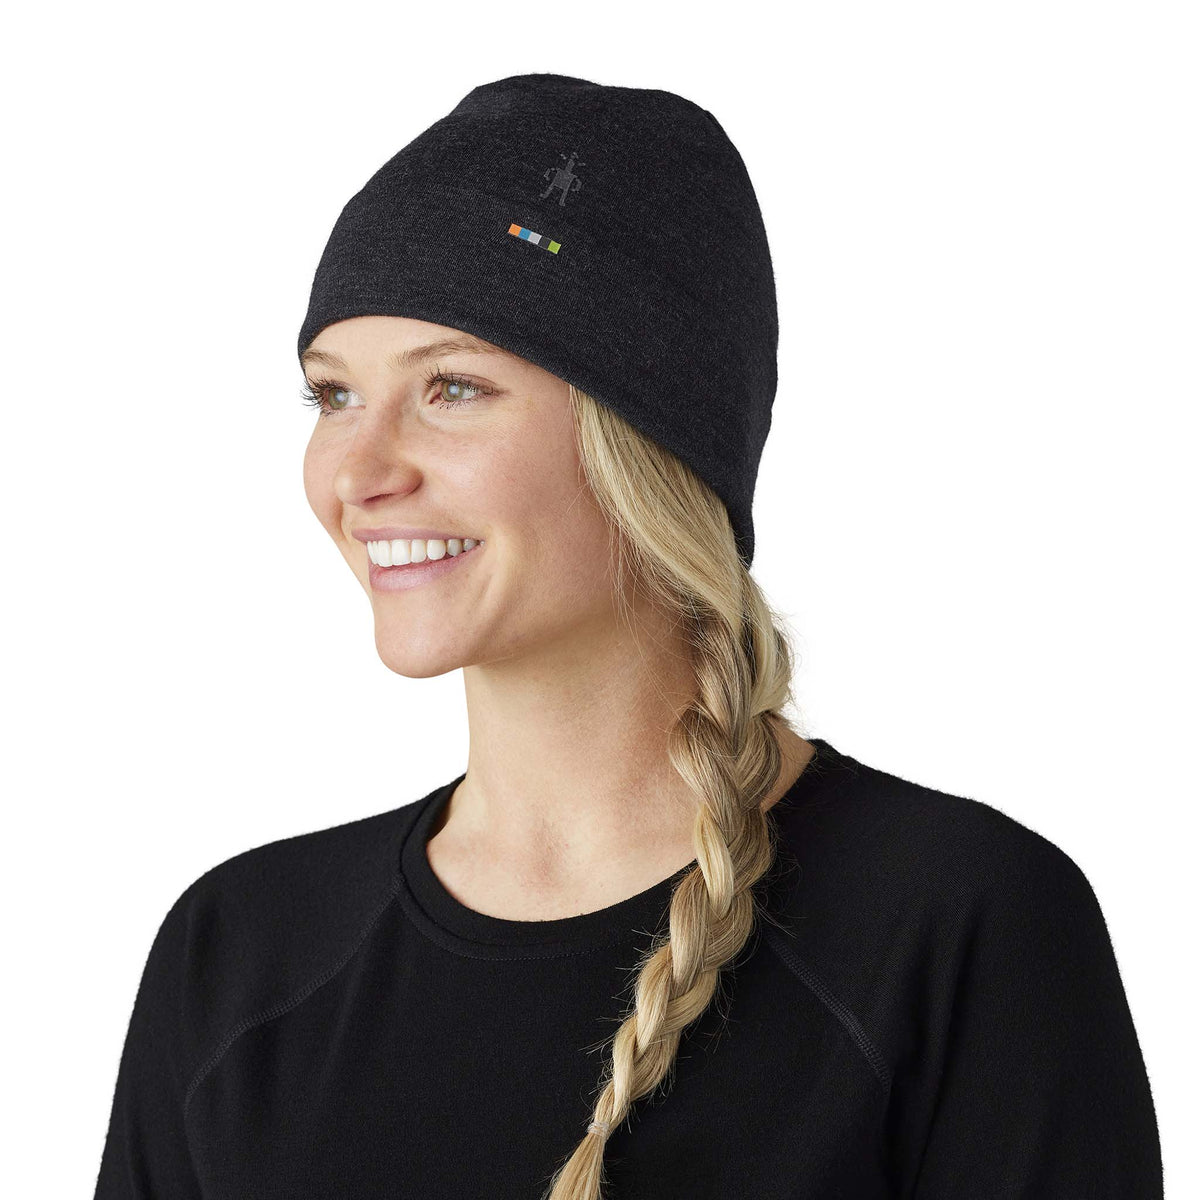 Smartwool Merino 250 Cuffed Beanie tuque unisexe charcoal femme